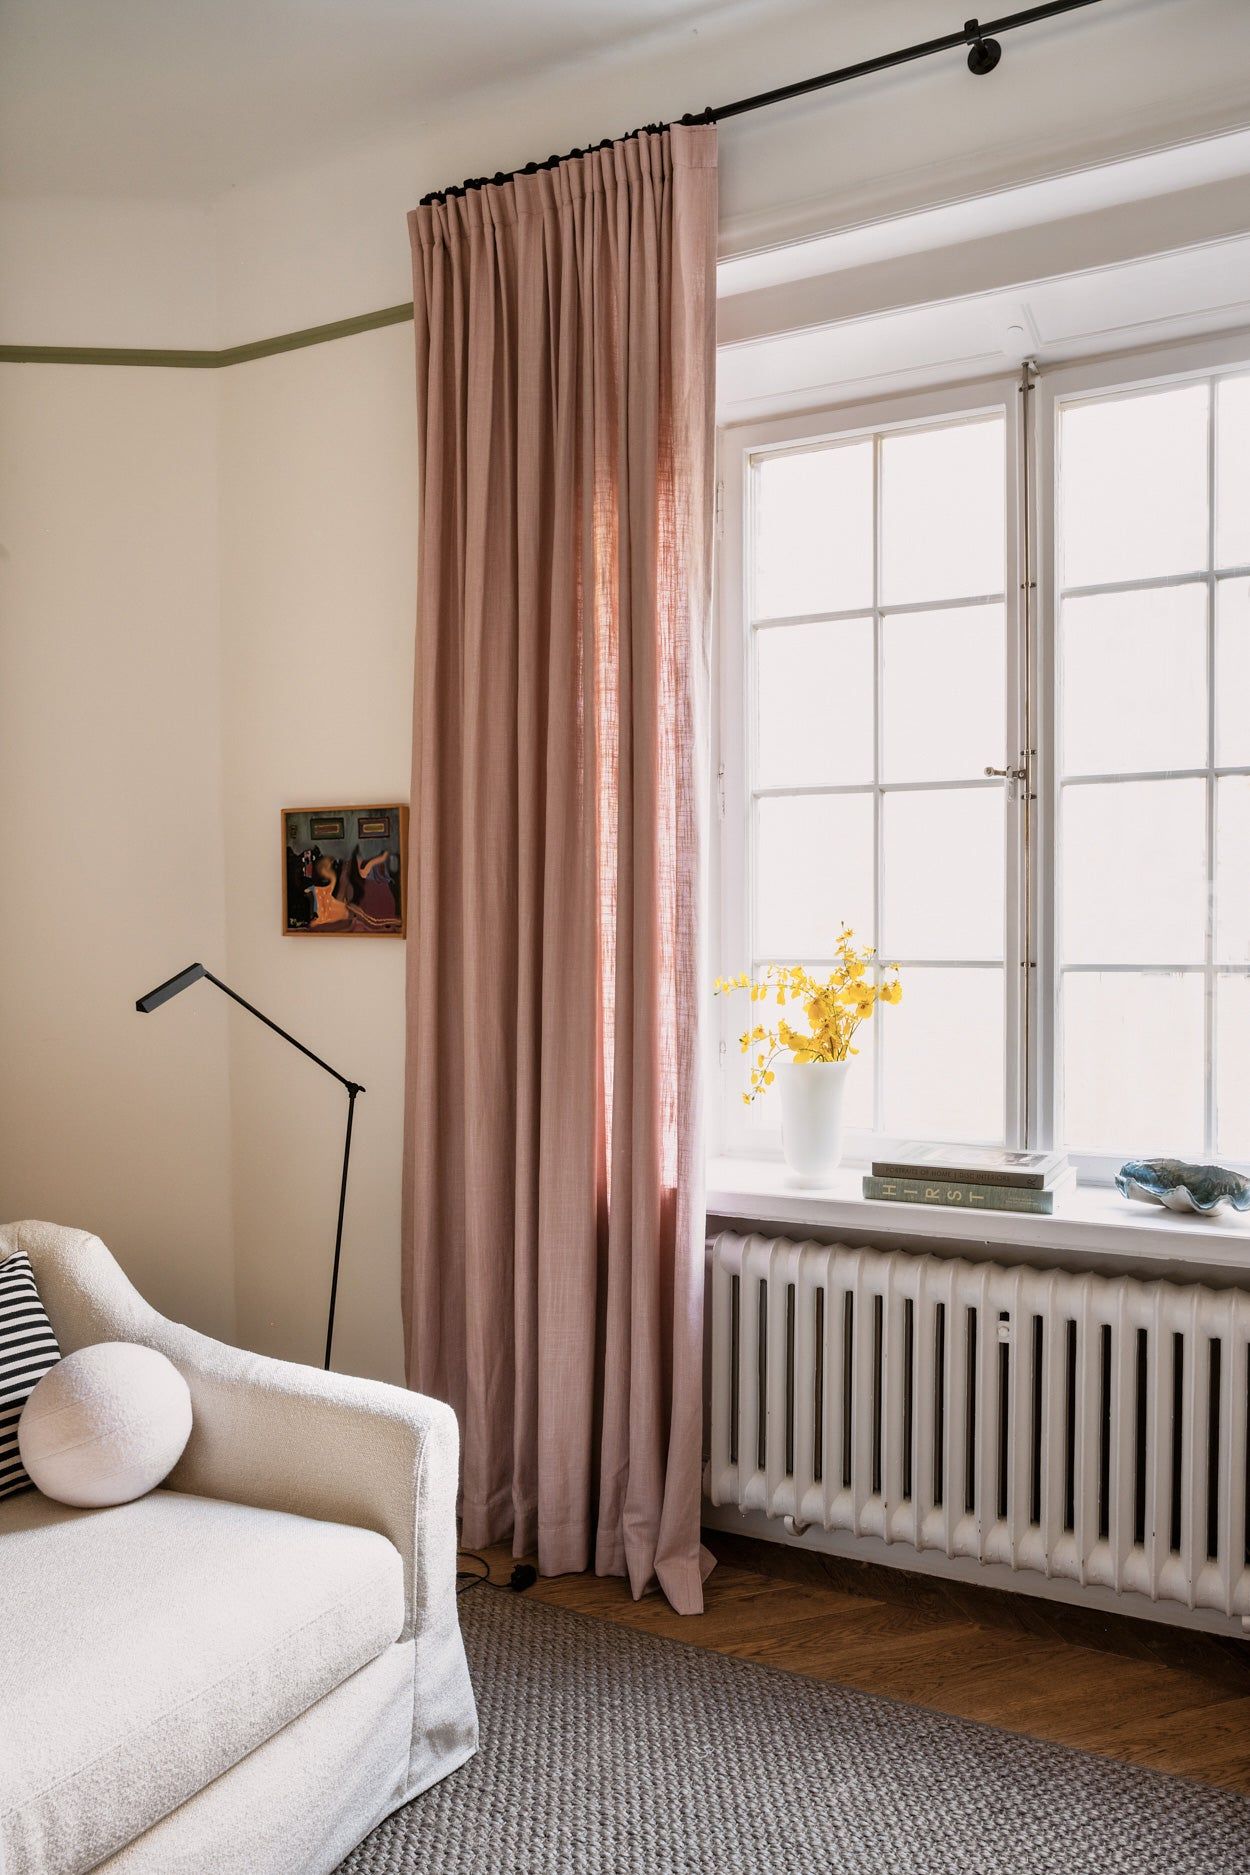 Pretty in Pink: Stylish Privacy with Pink Curtains